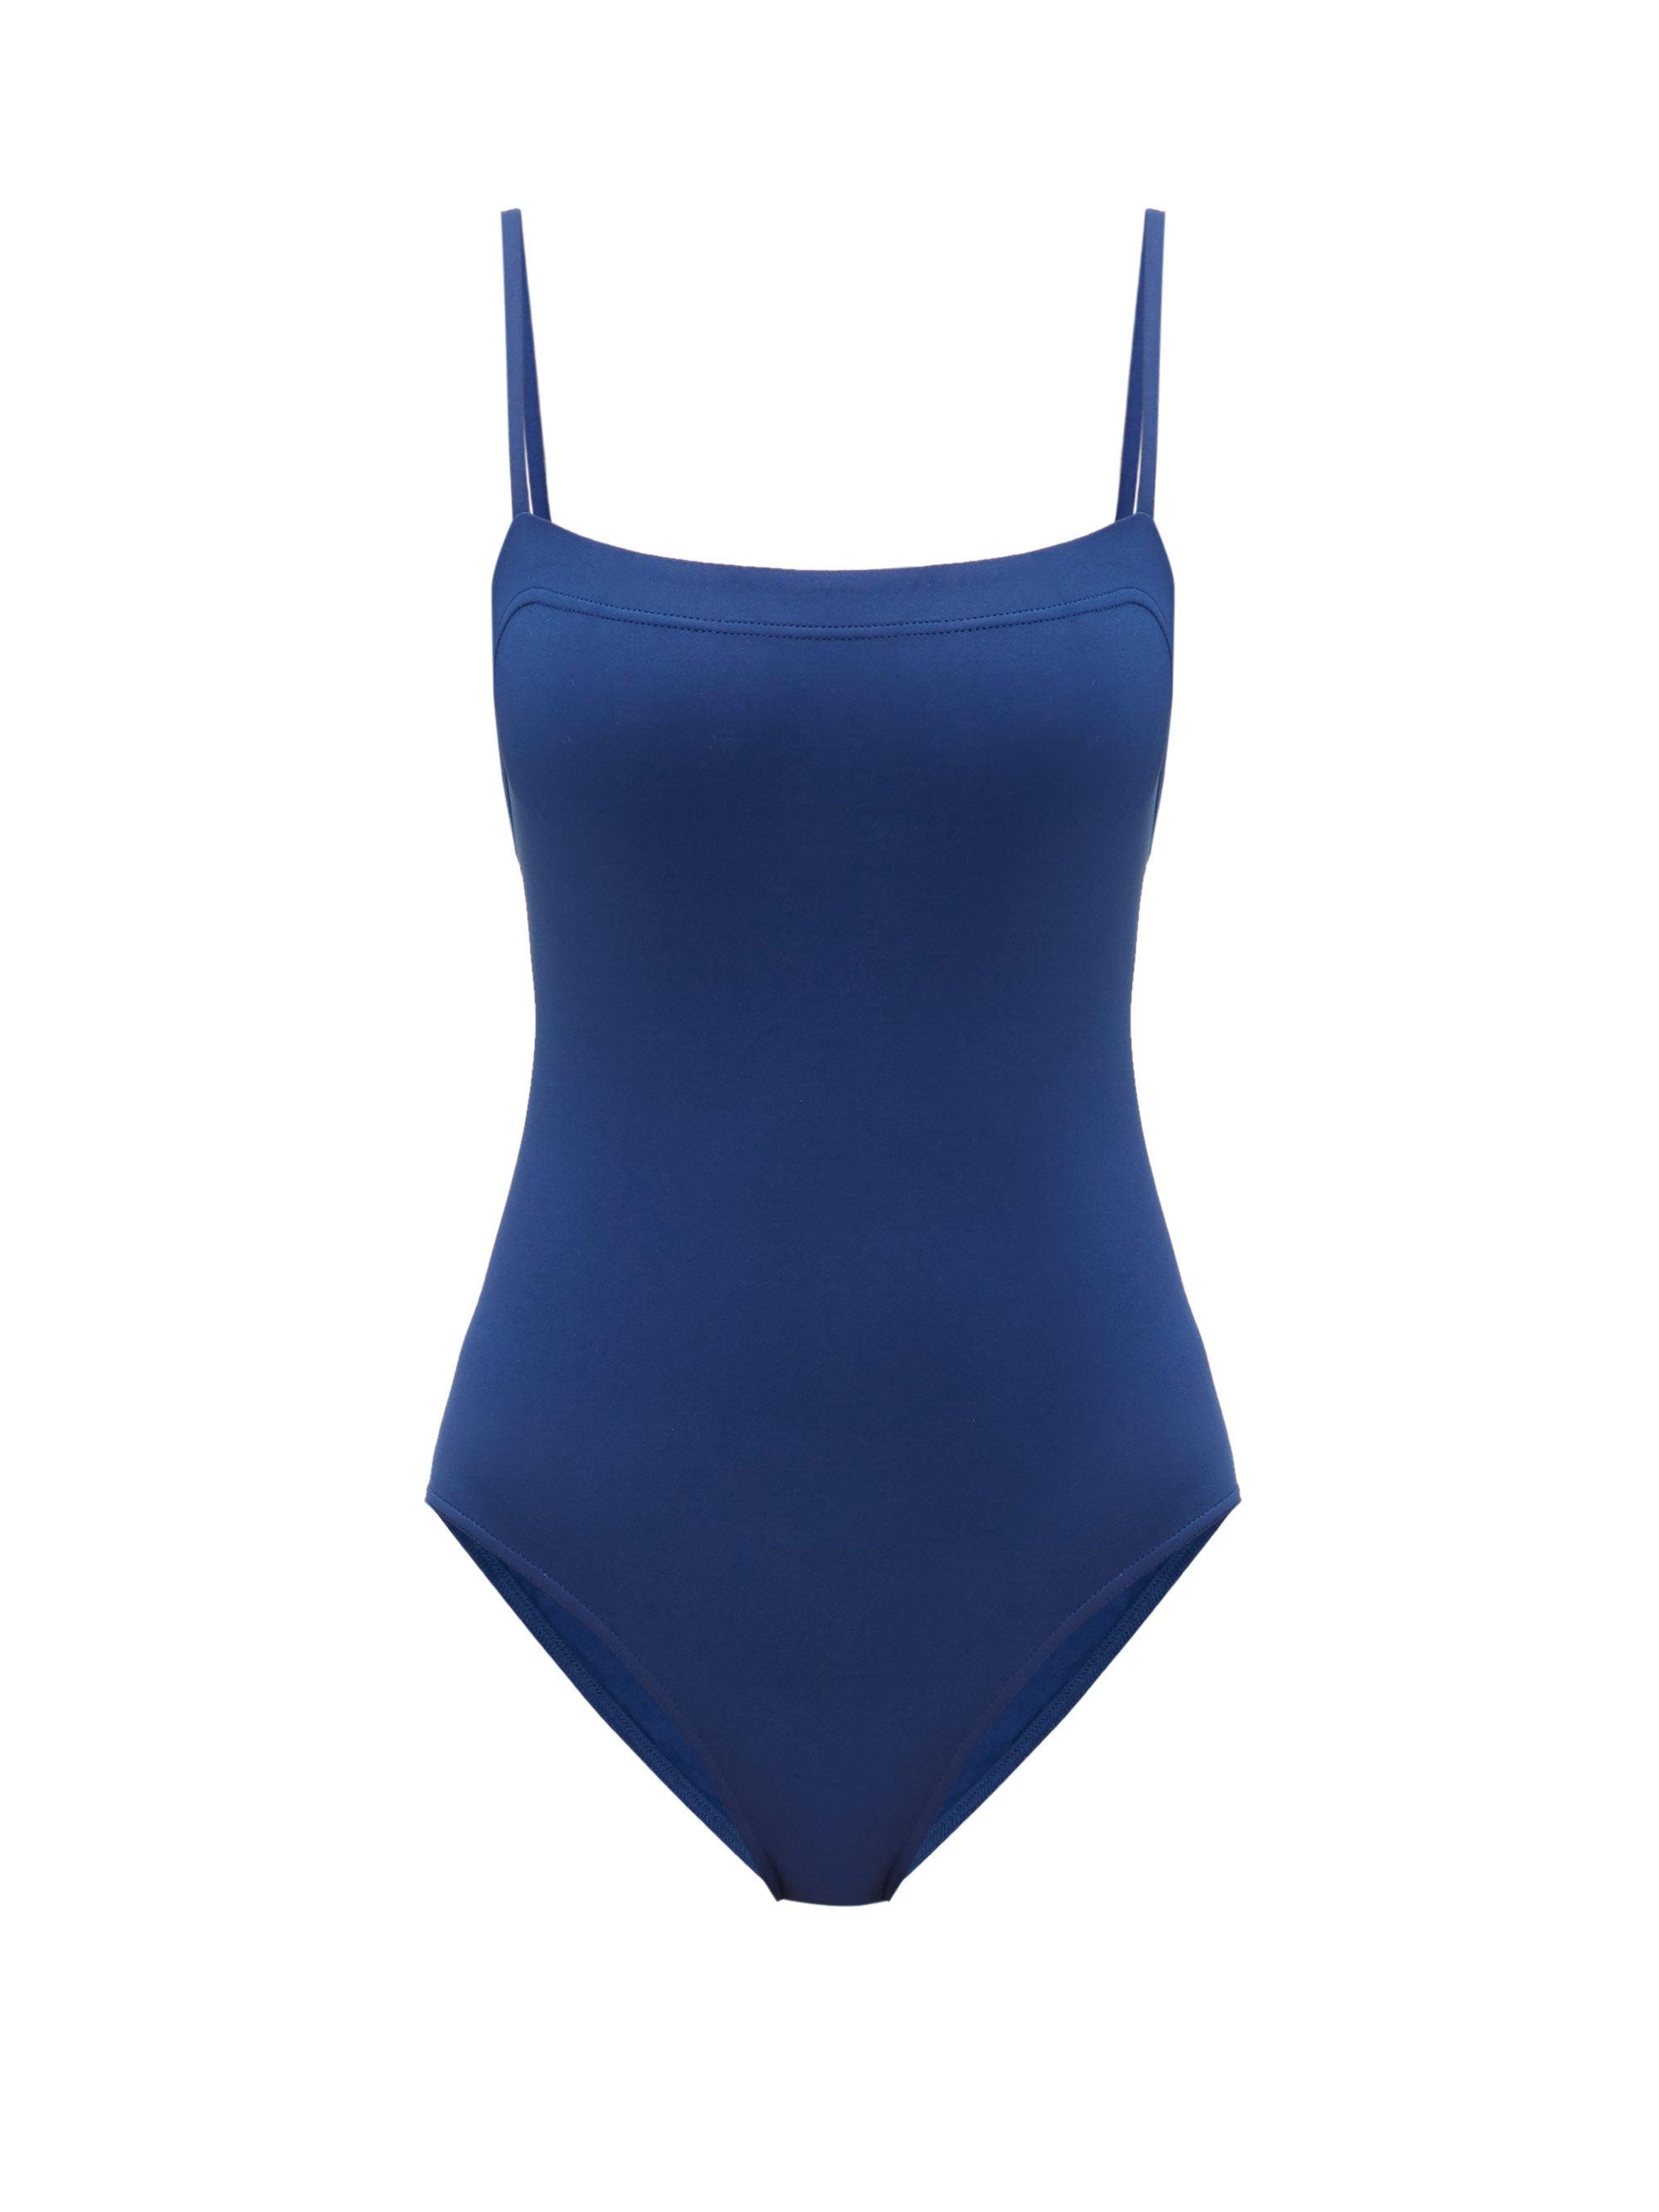 Eres Aquarelle Square-neck Swimsuit in Navy (Blue) - Lyst